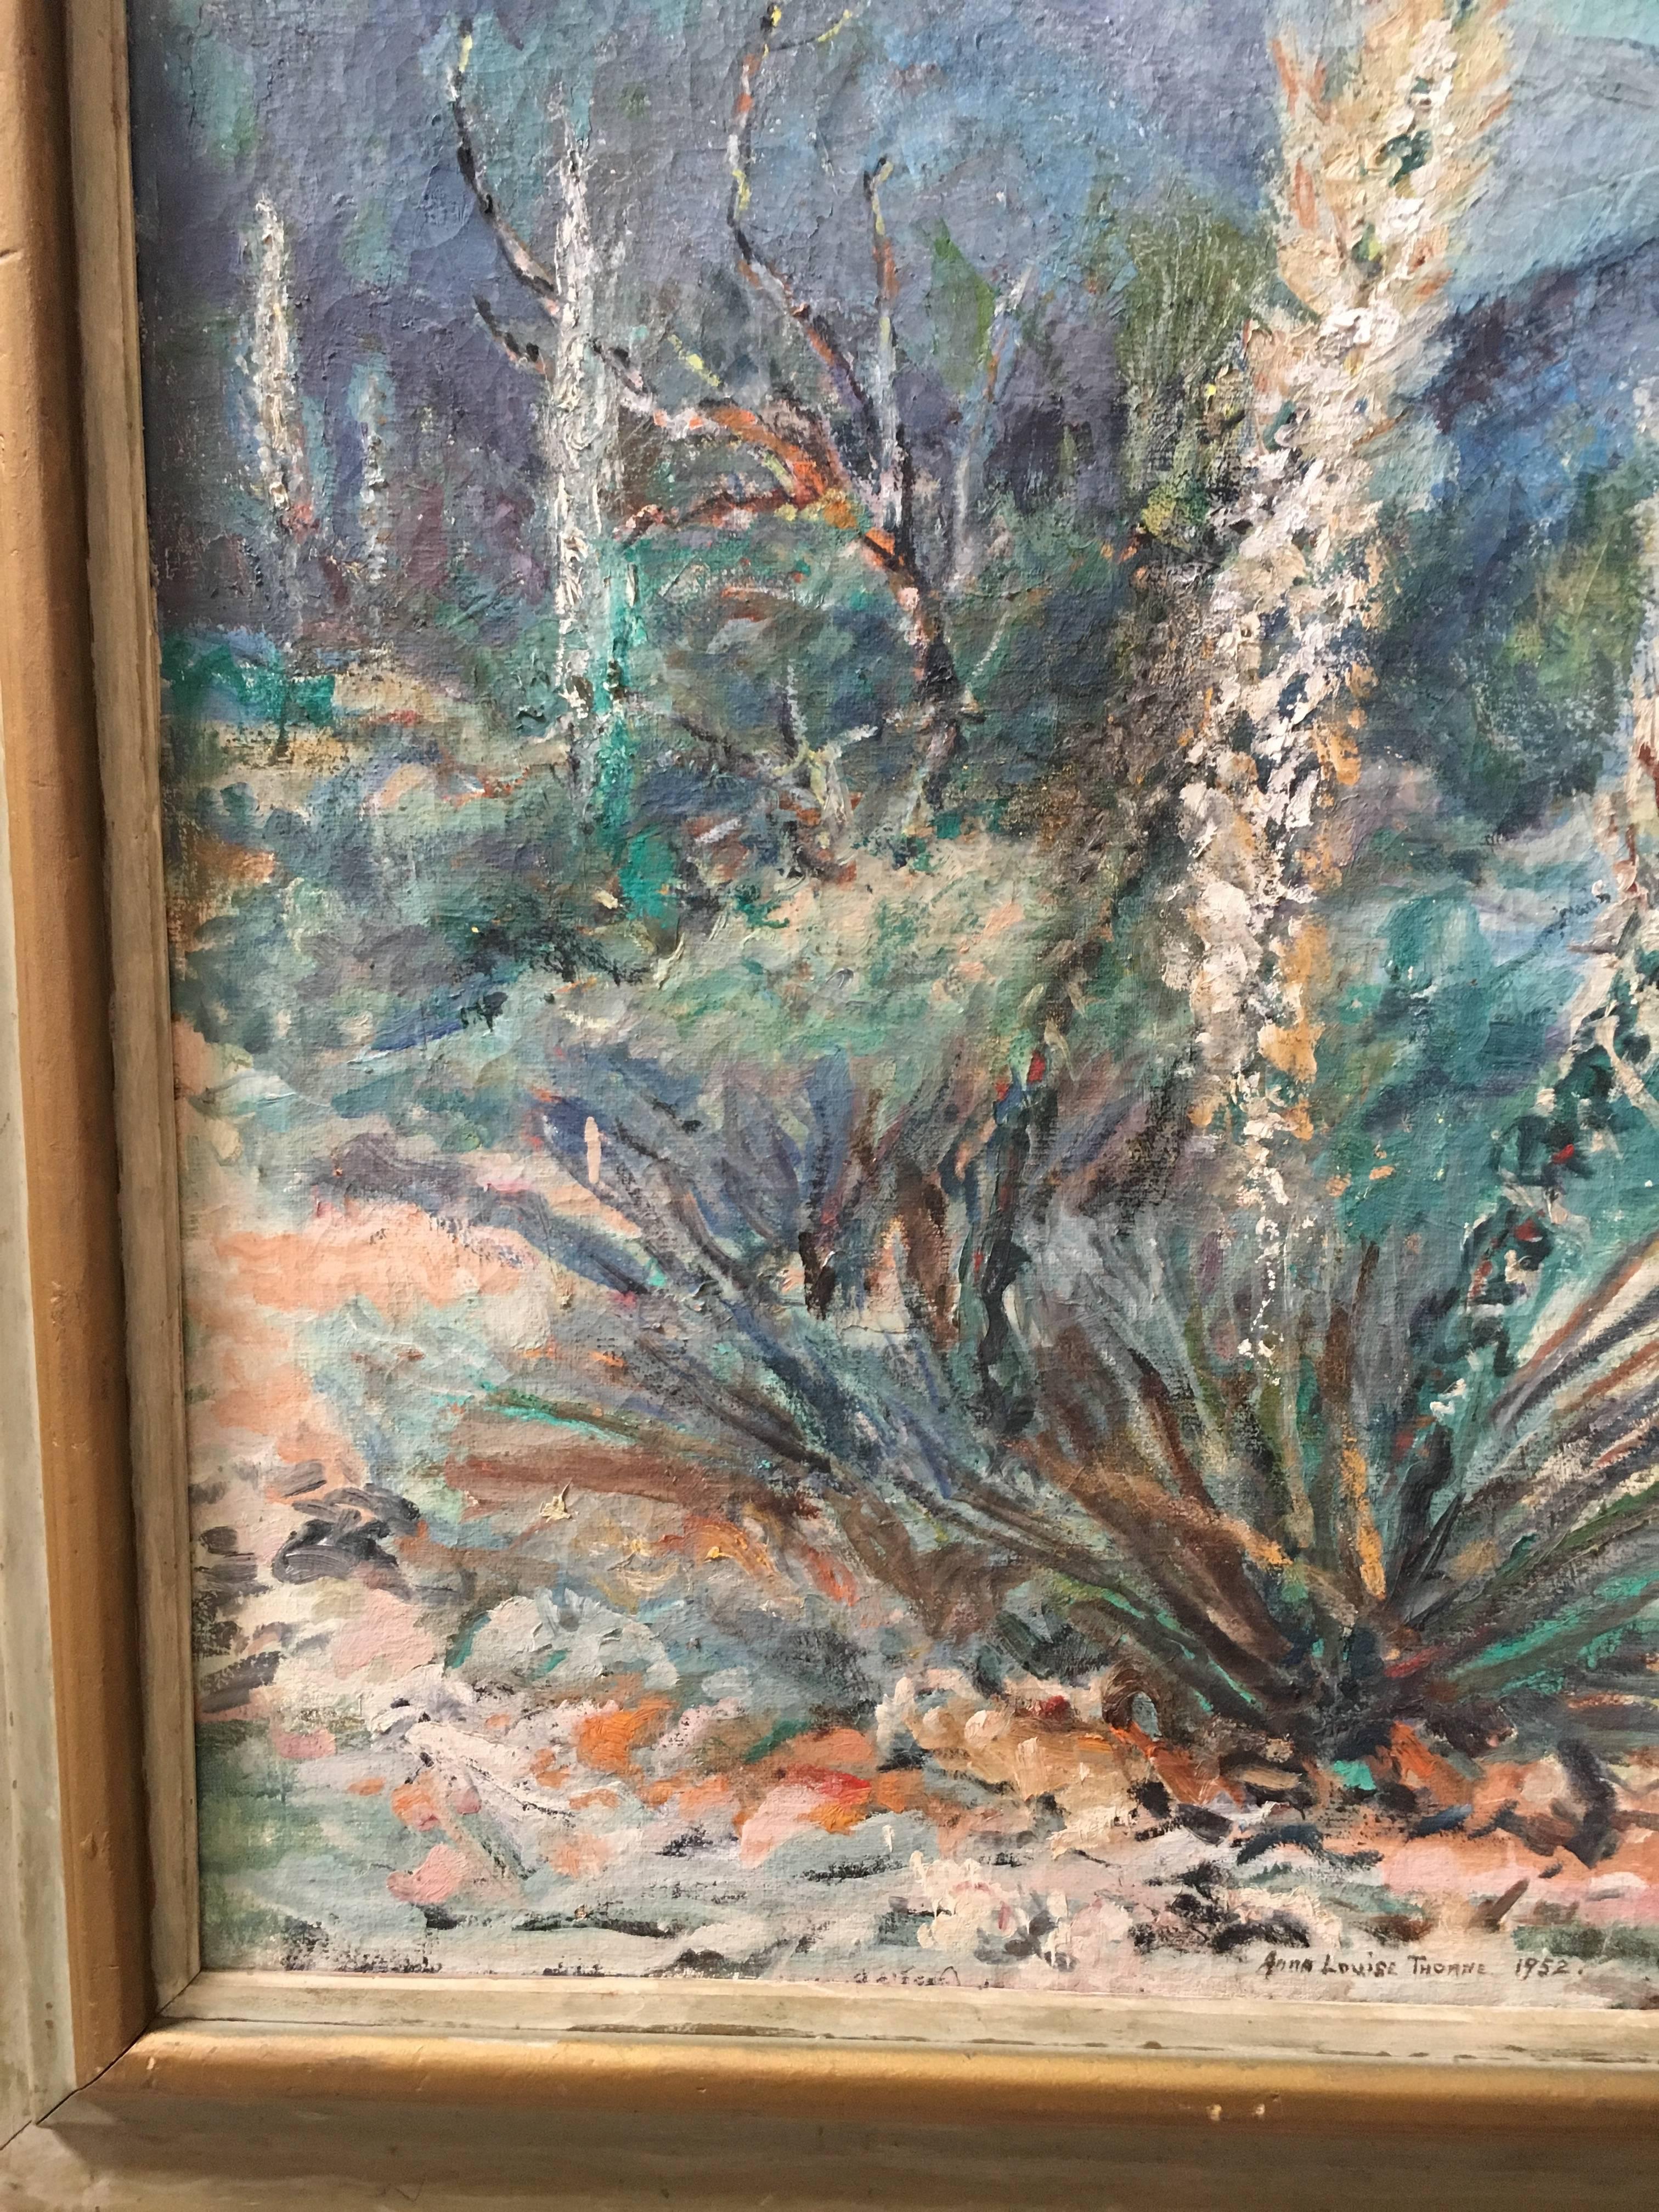 American Yucca Valley Oil on Canvas Painting by Anna Louise Thorne, 1952